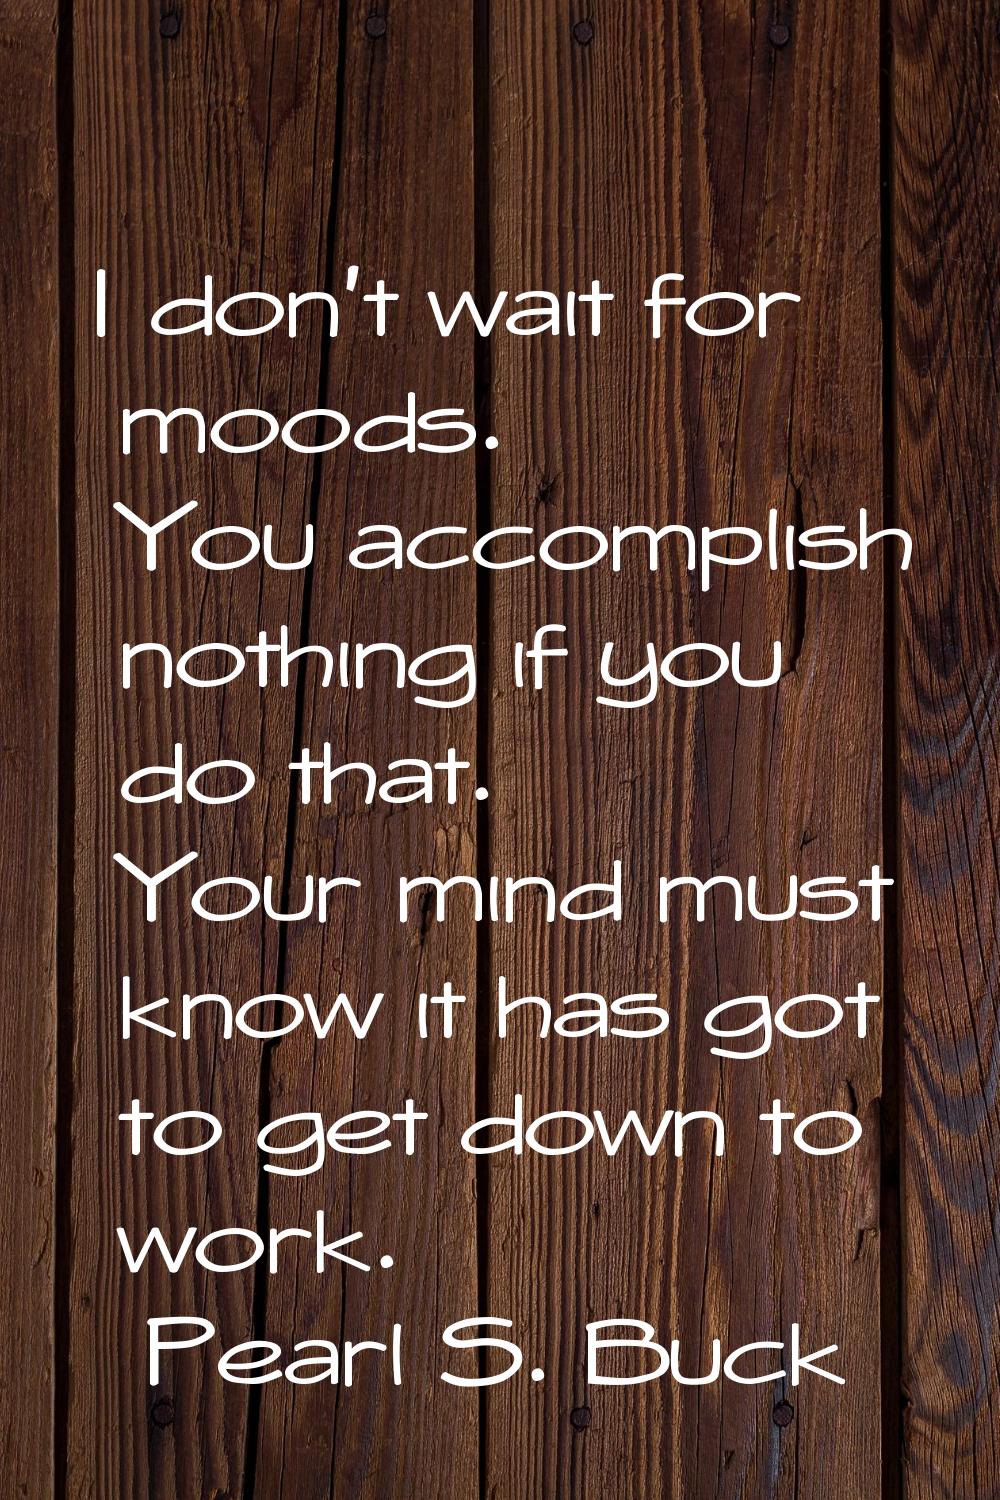 I don't wait for moods. You accomplish nothing if you do that. Your mind must know it has got to ge